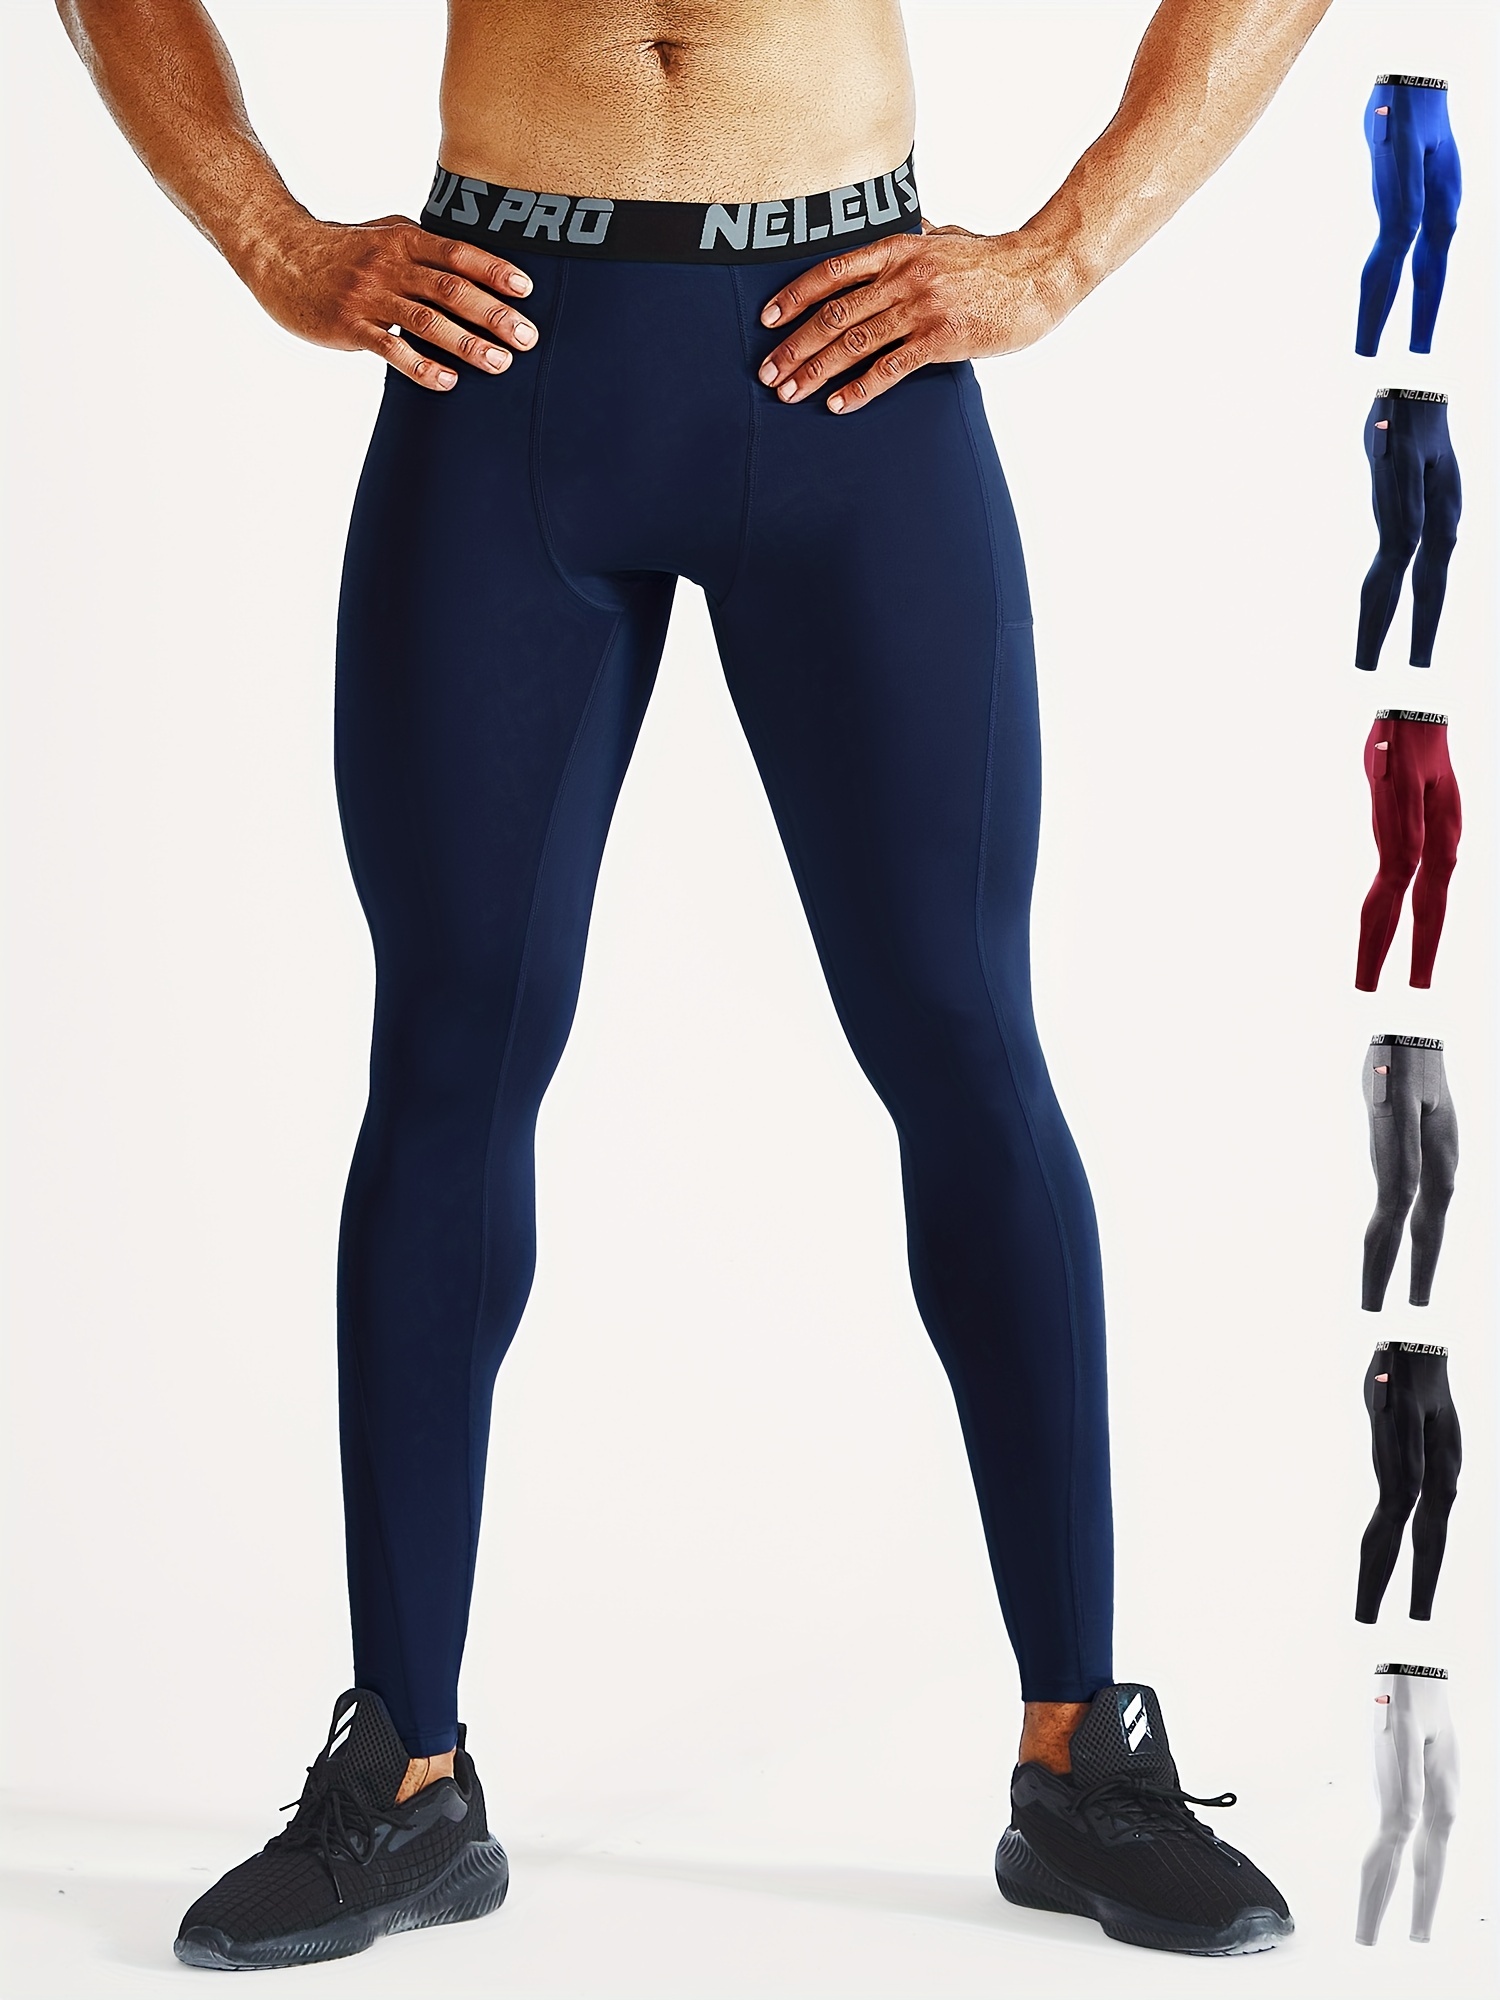 Mens Quick Dry Compression Running Tights 2020 Fitness Leggings